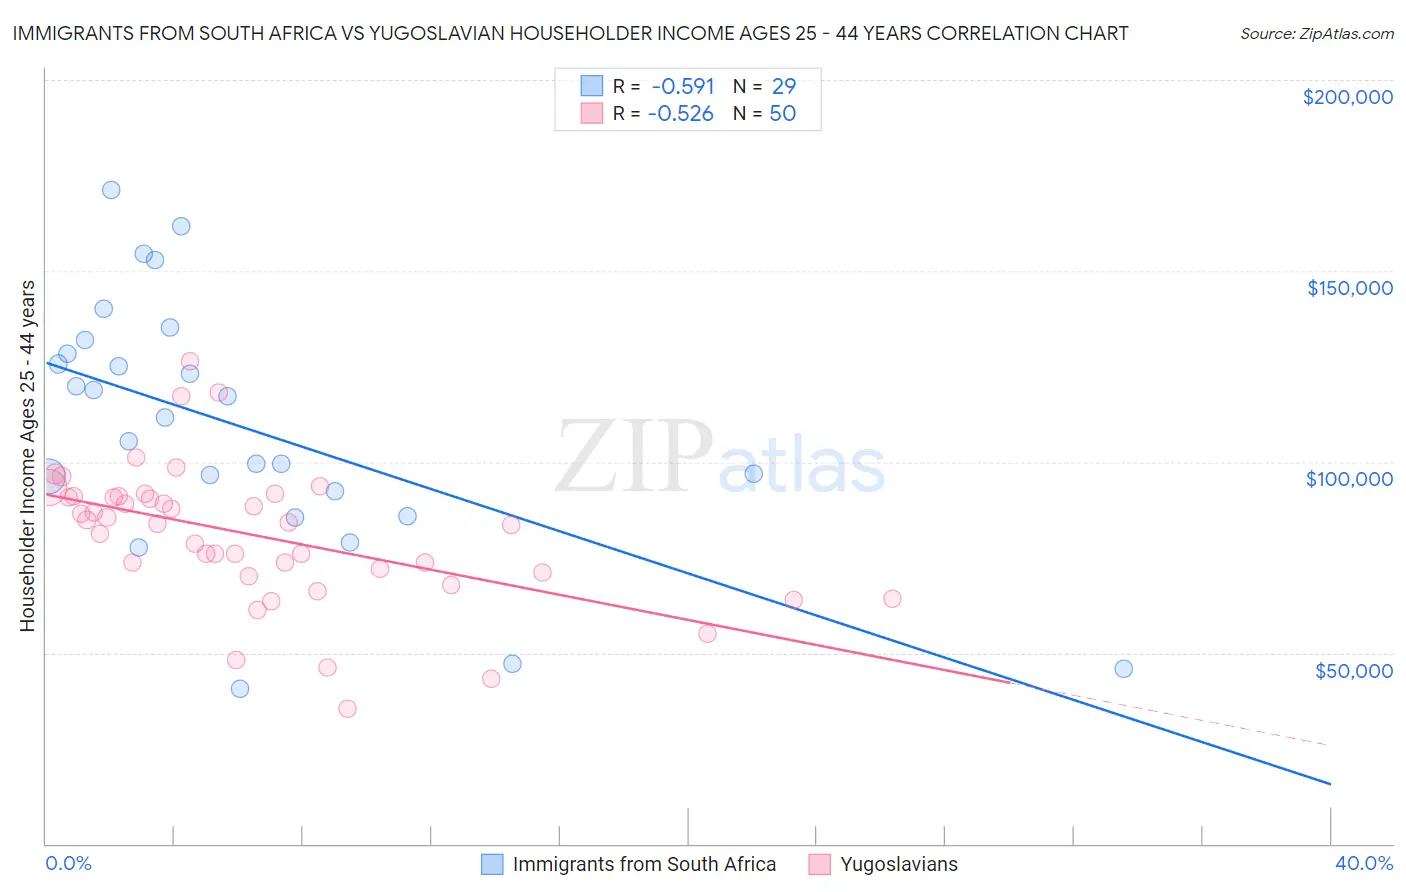 Immigrants from South Africa vs Yugoslavian Householder Income Ages 25 - 44 years